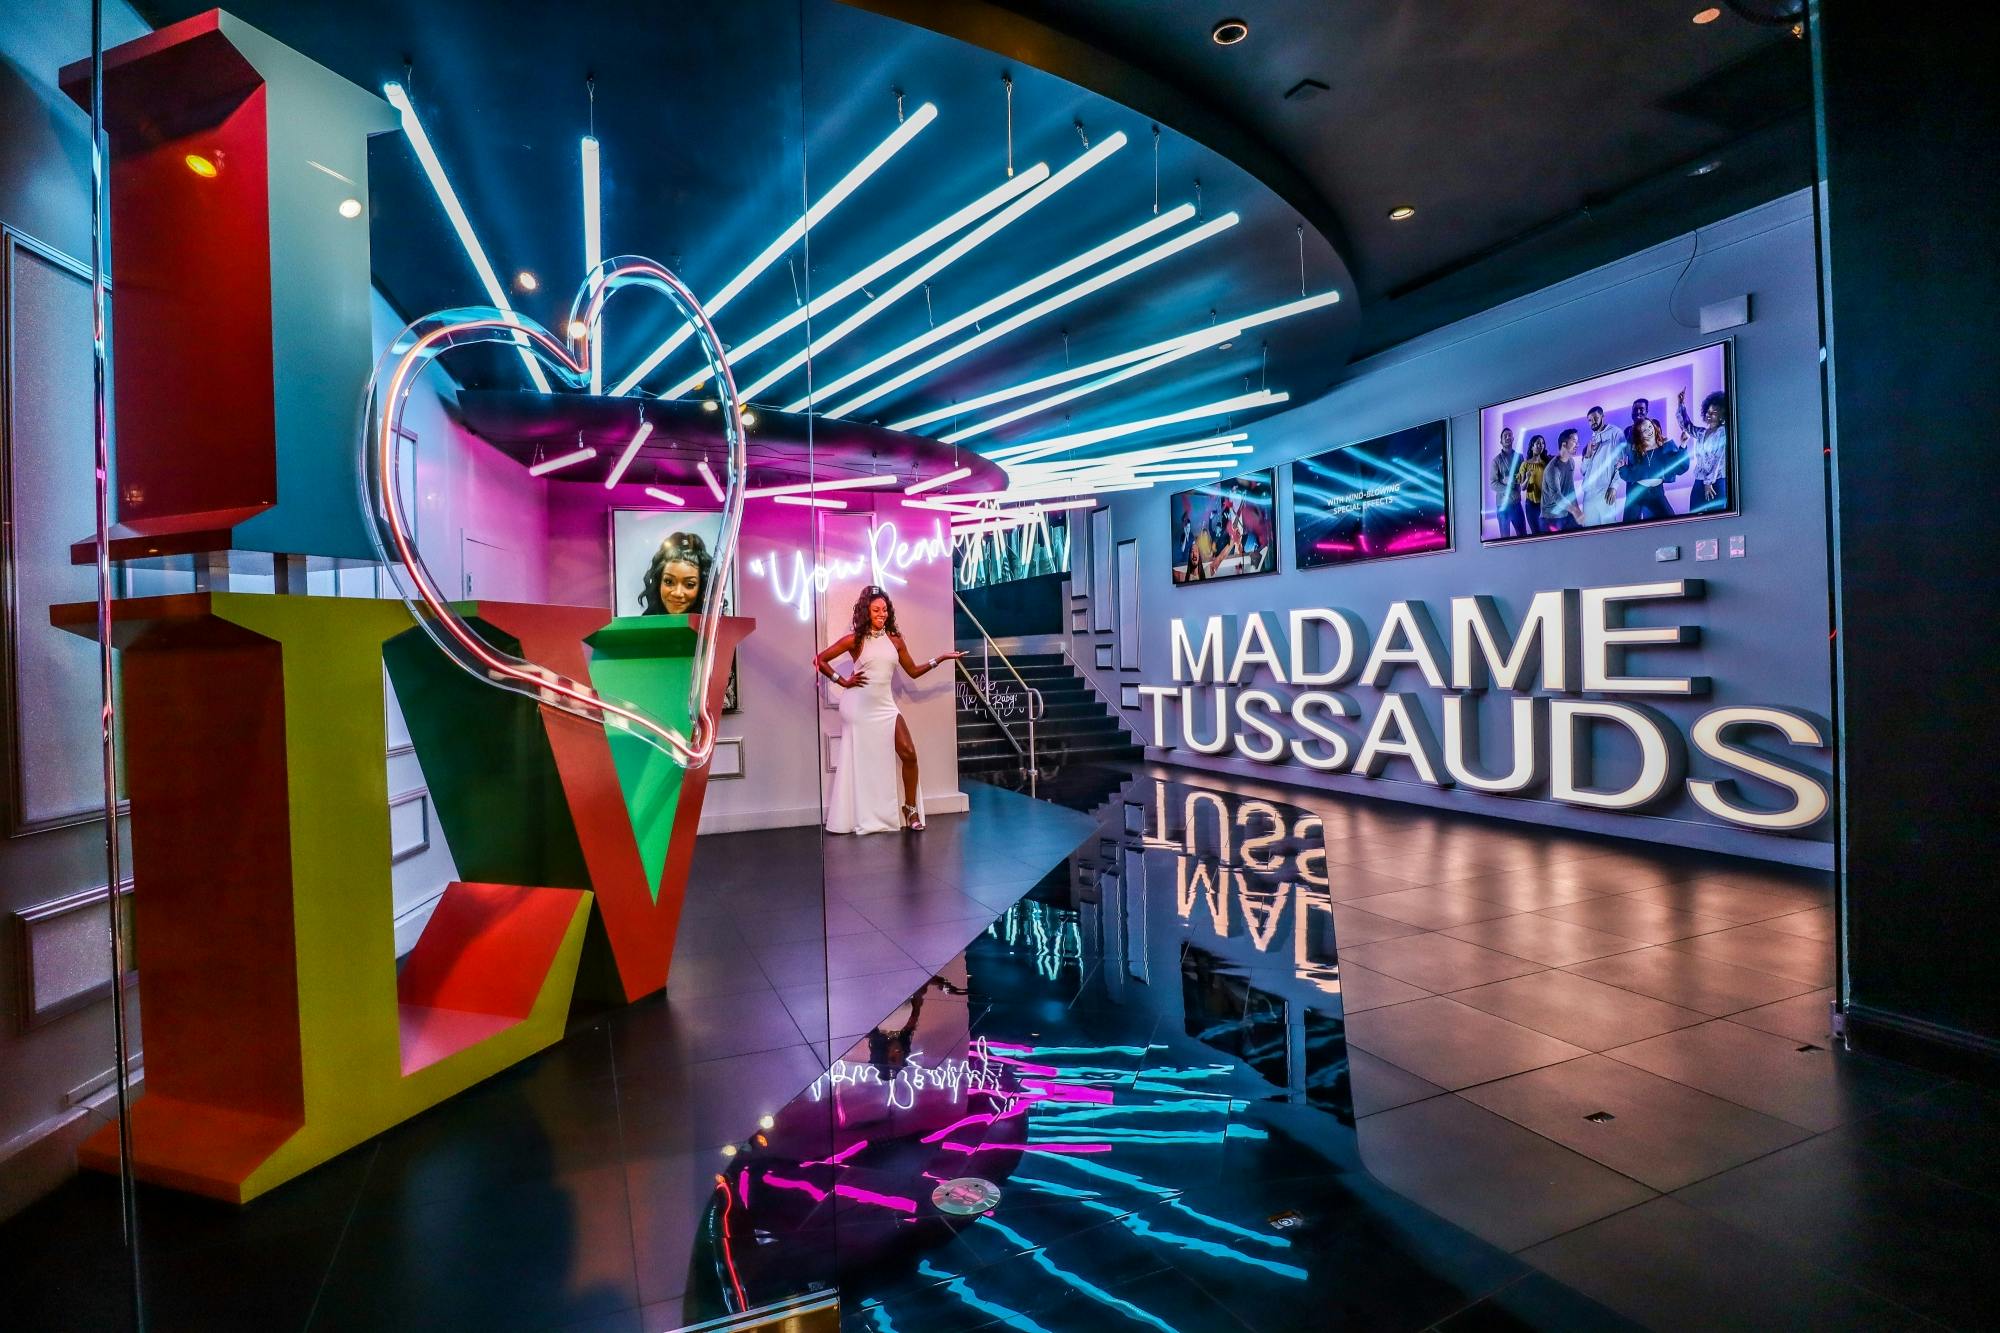 Madame Tussauds Las Vegas with Marvel 4D and 7D Experience